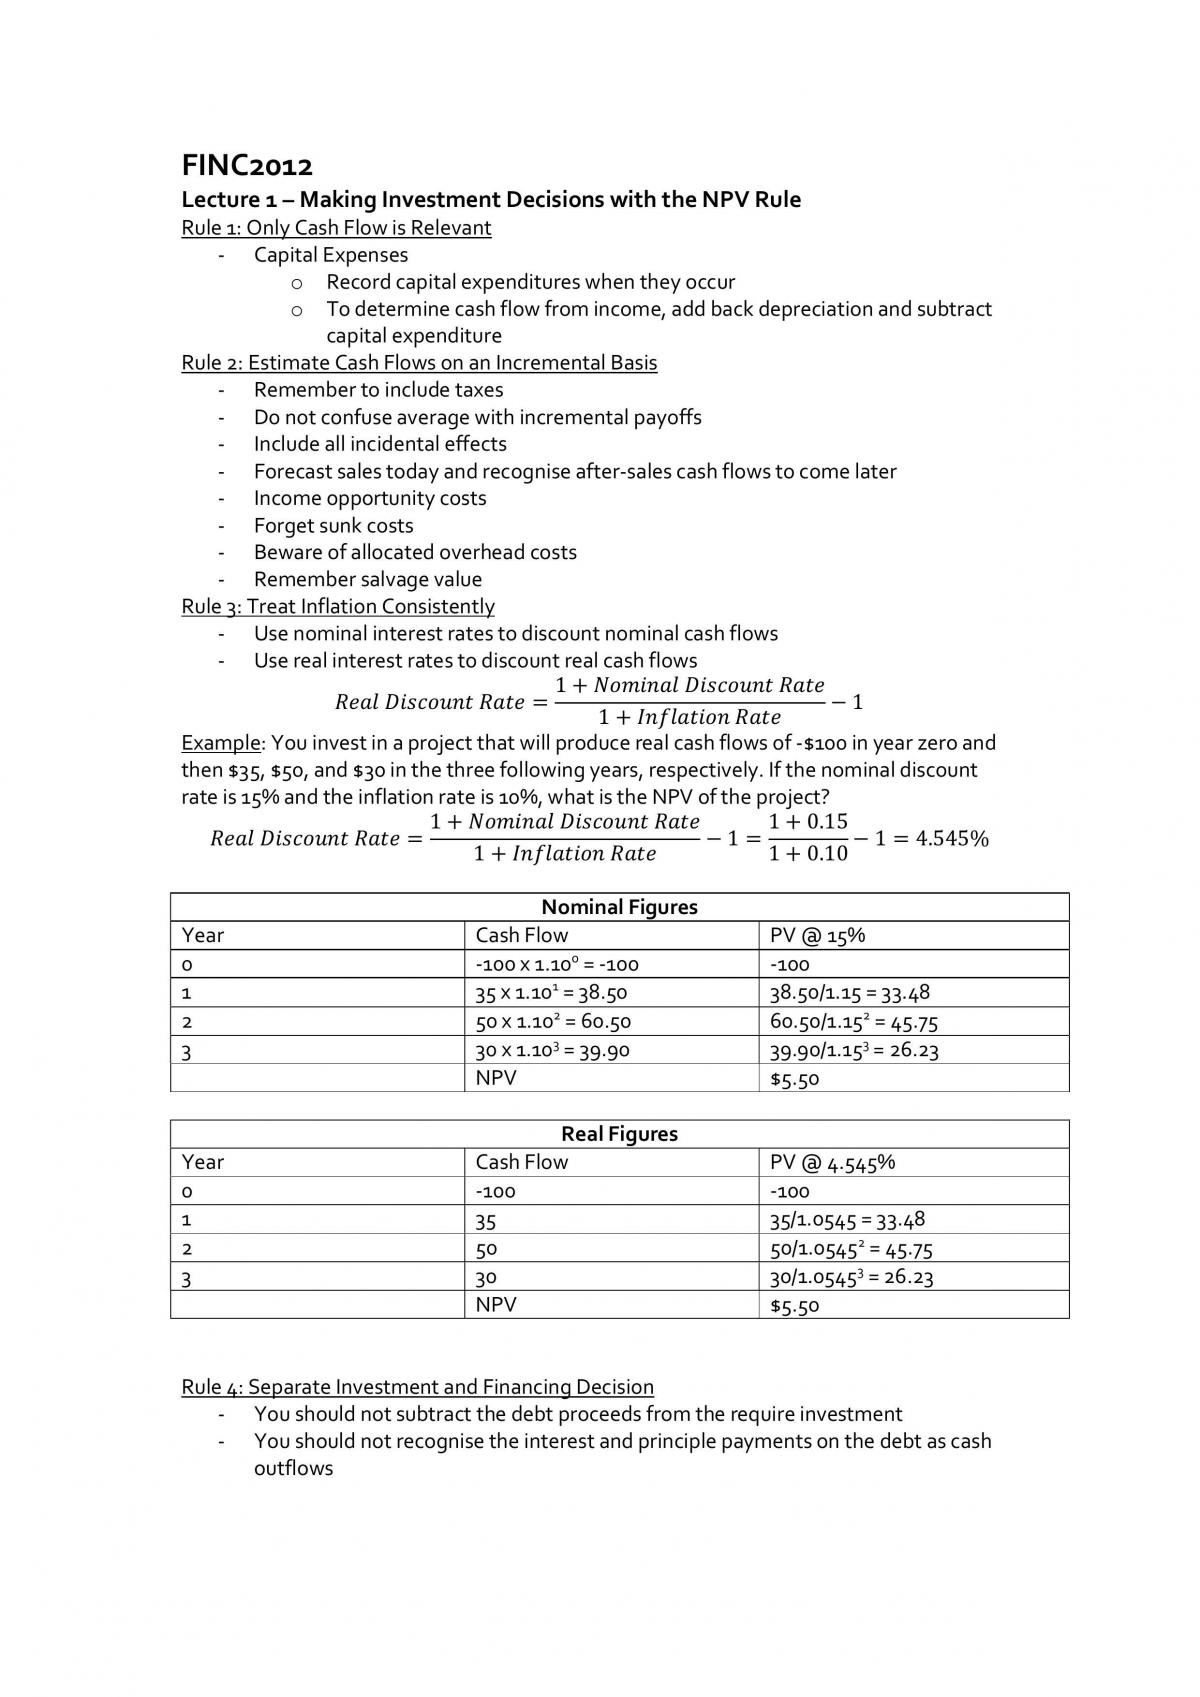 FINC2012 Full Unit Review Notes - Page 1